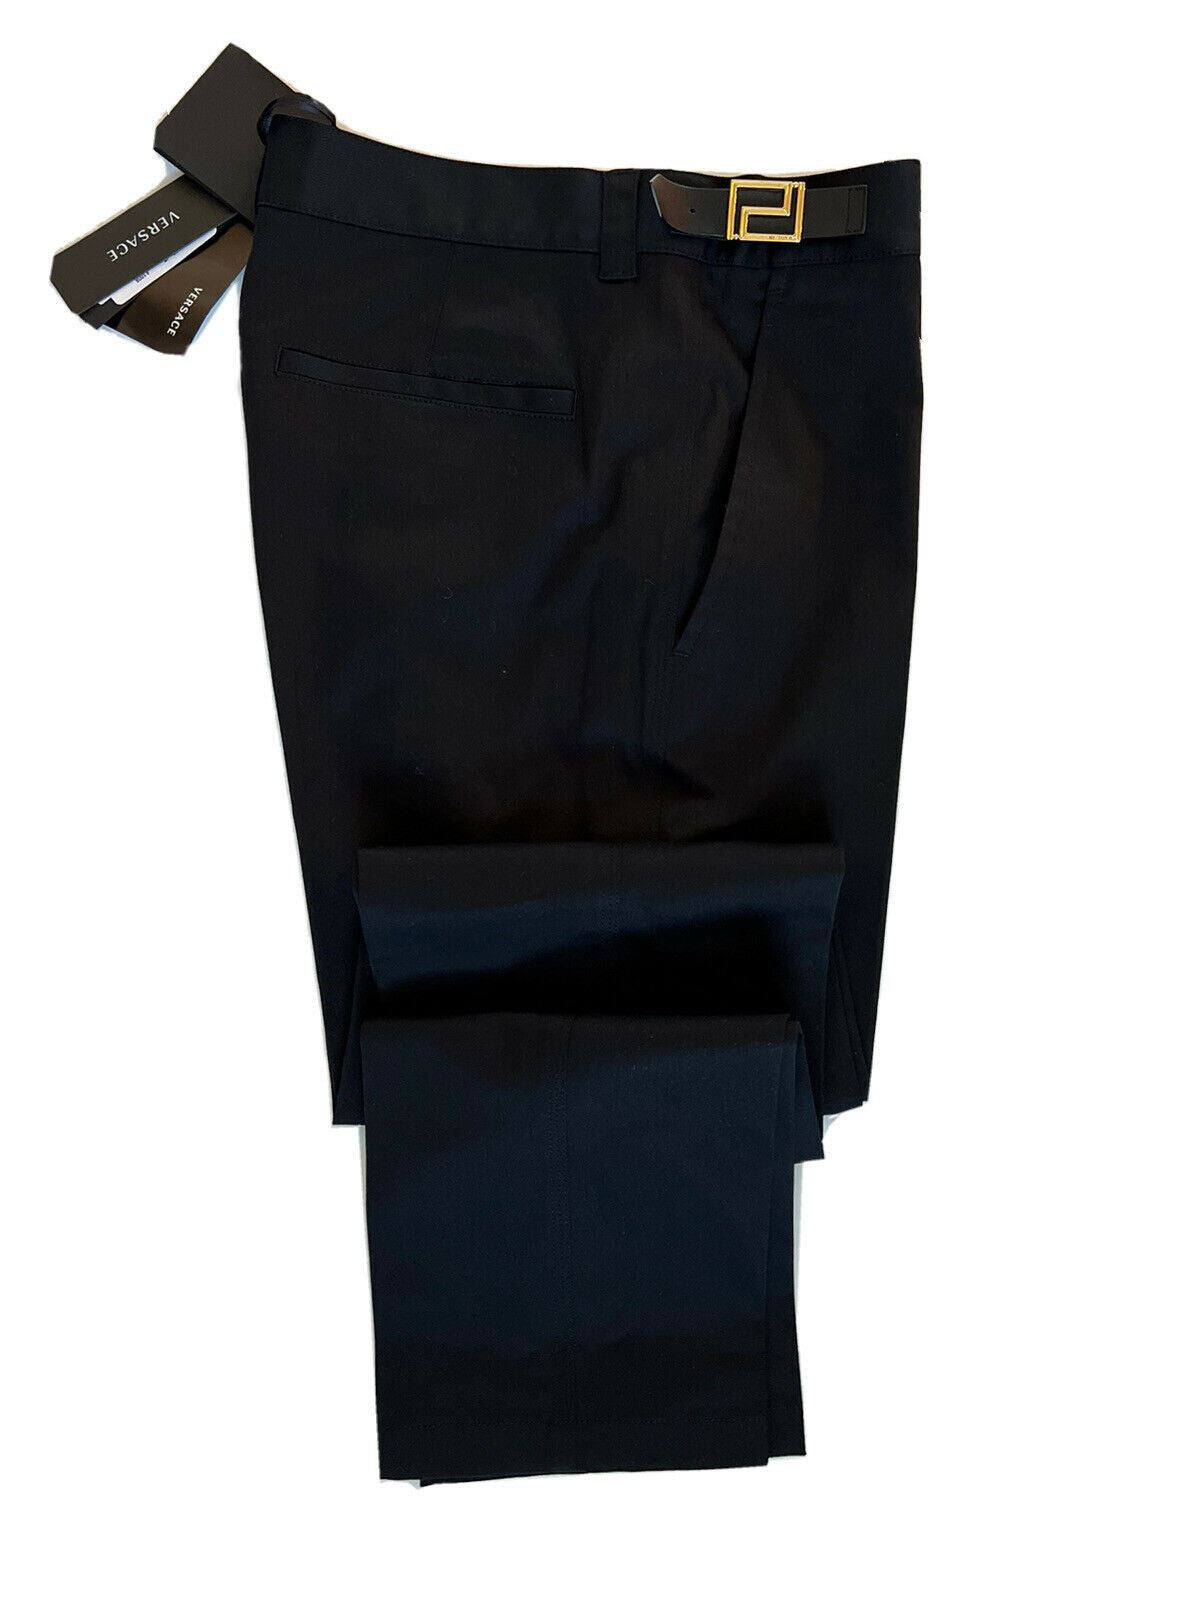 NWT $725 Versace Palazzo Men's Black Pants 40 US (56 Euro) Made in Italy 87482